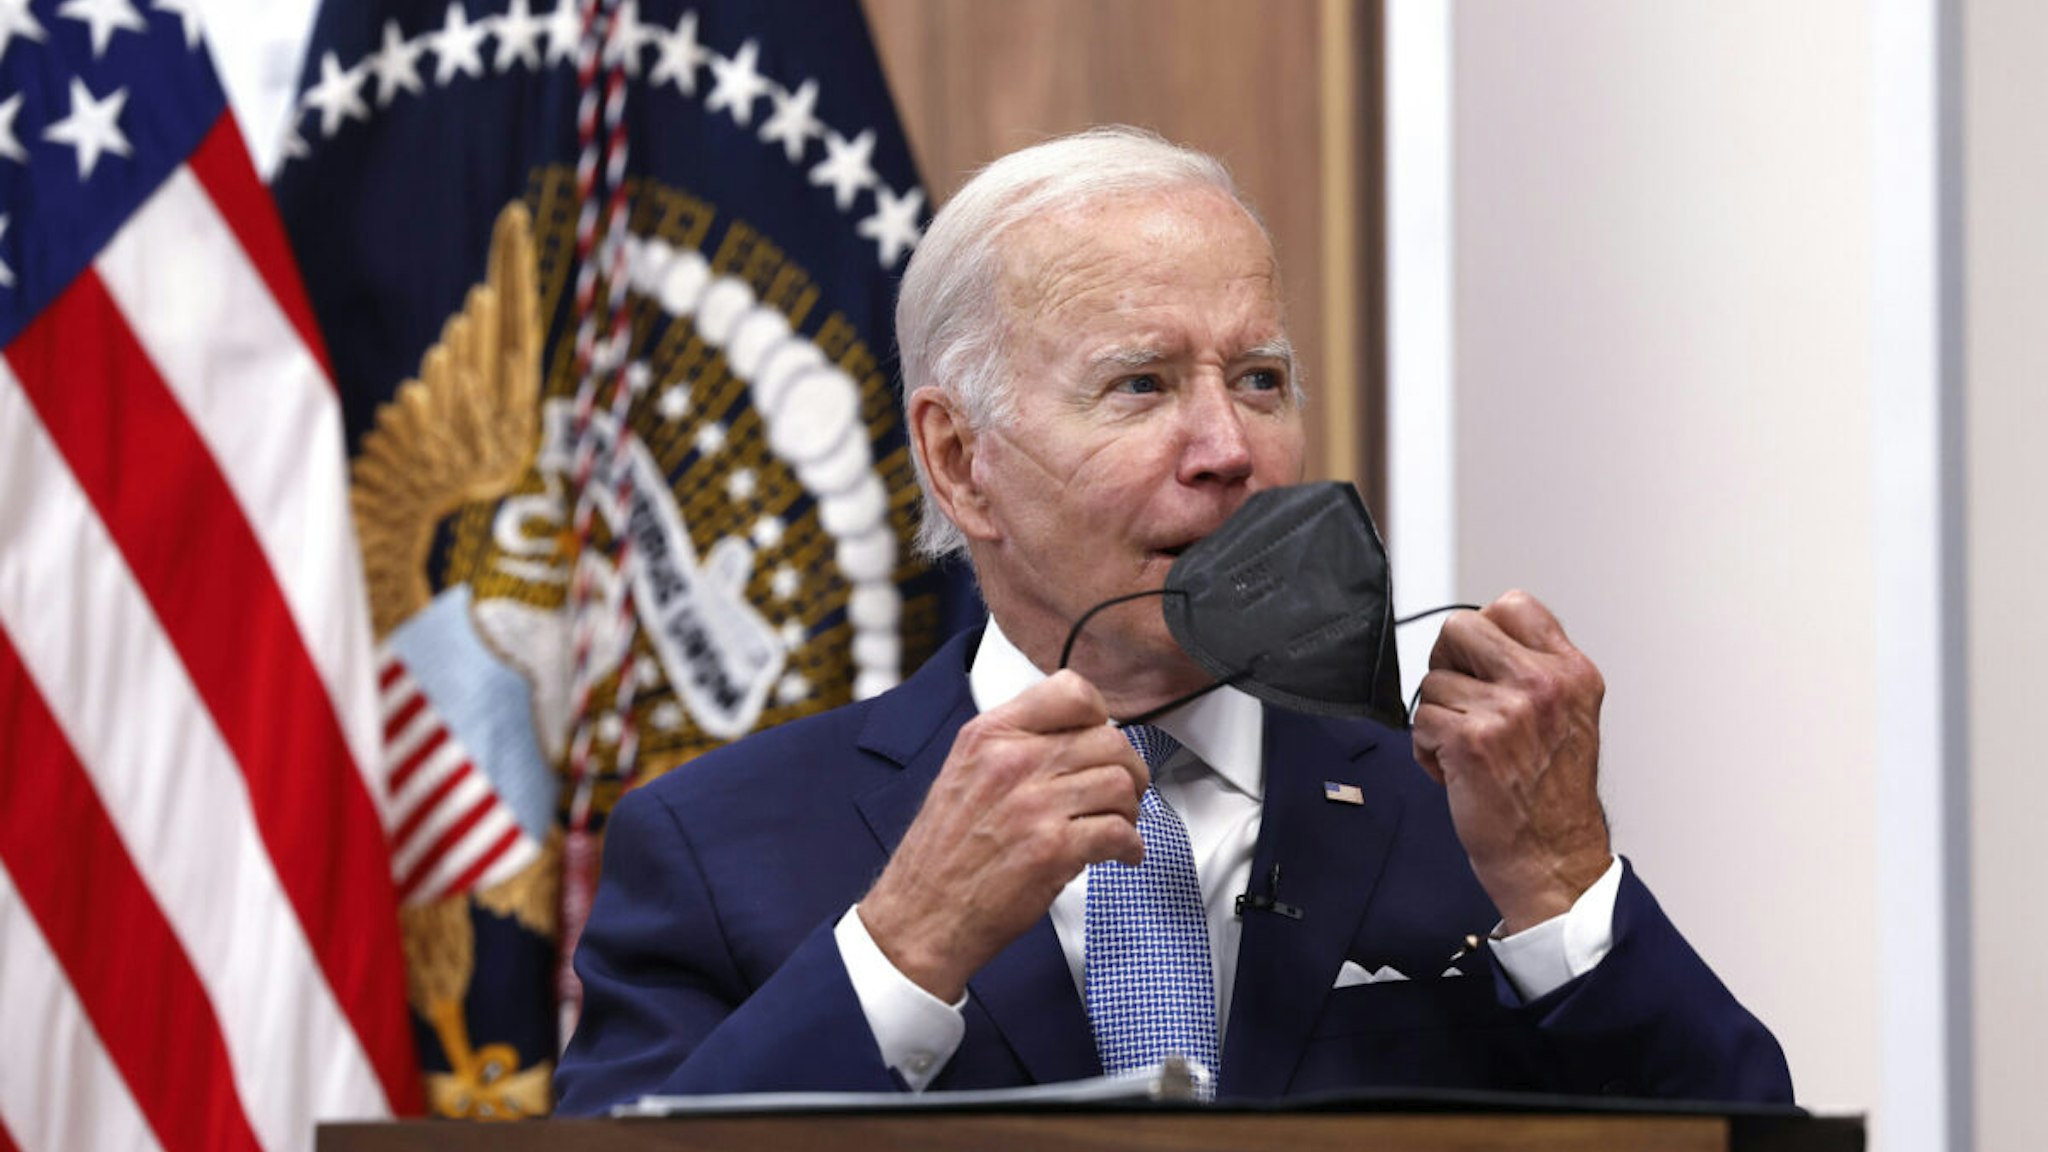 U.S. President Joe Biden takes his face mask off during a meeting on the U.S. Economy with CEOs and members of his Cabinet in the South Court Auditorium of the White House on July 28, 2022 in Washington, DC